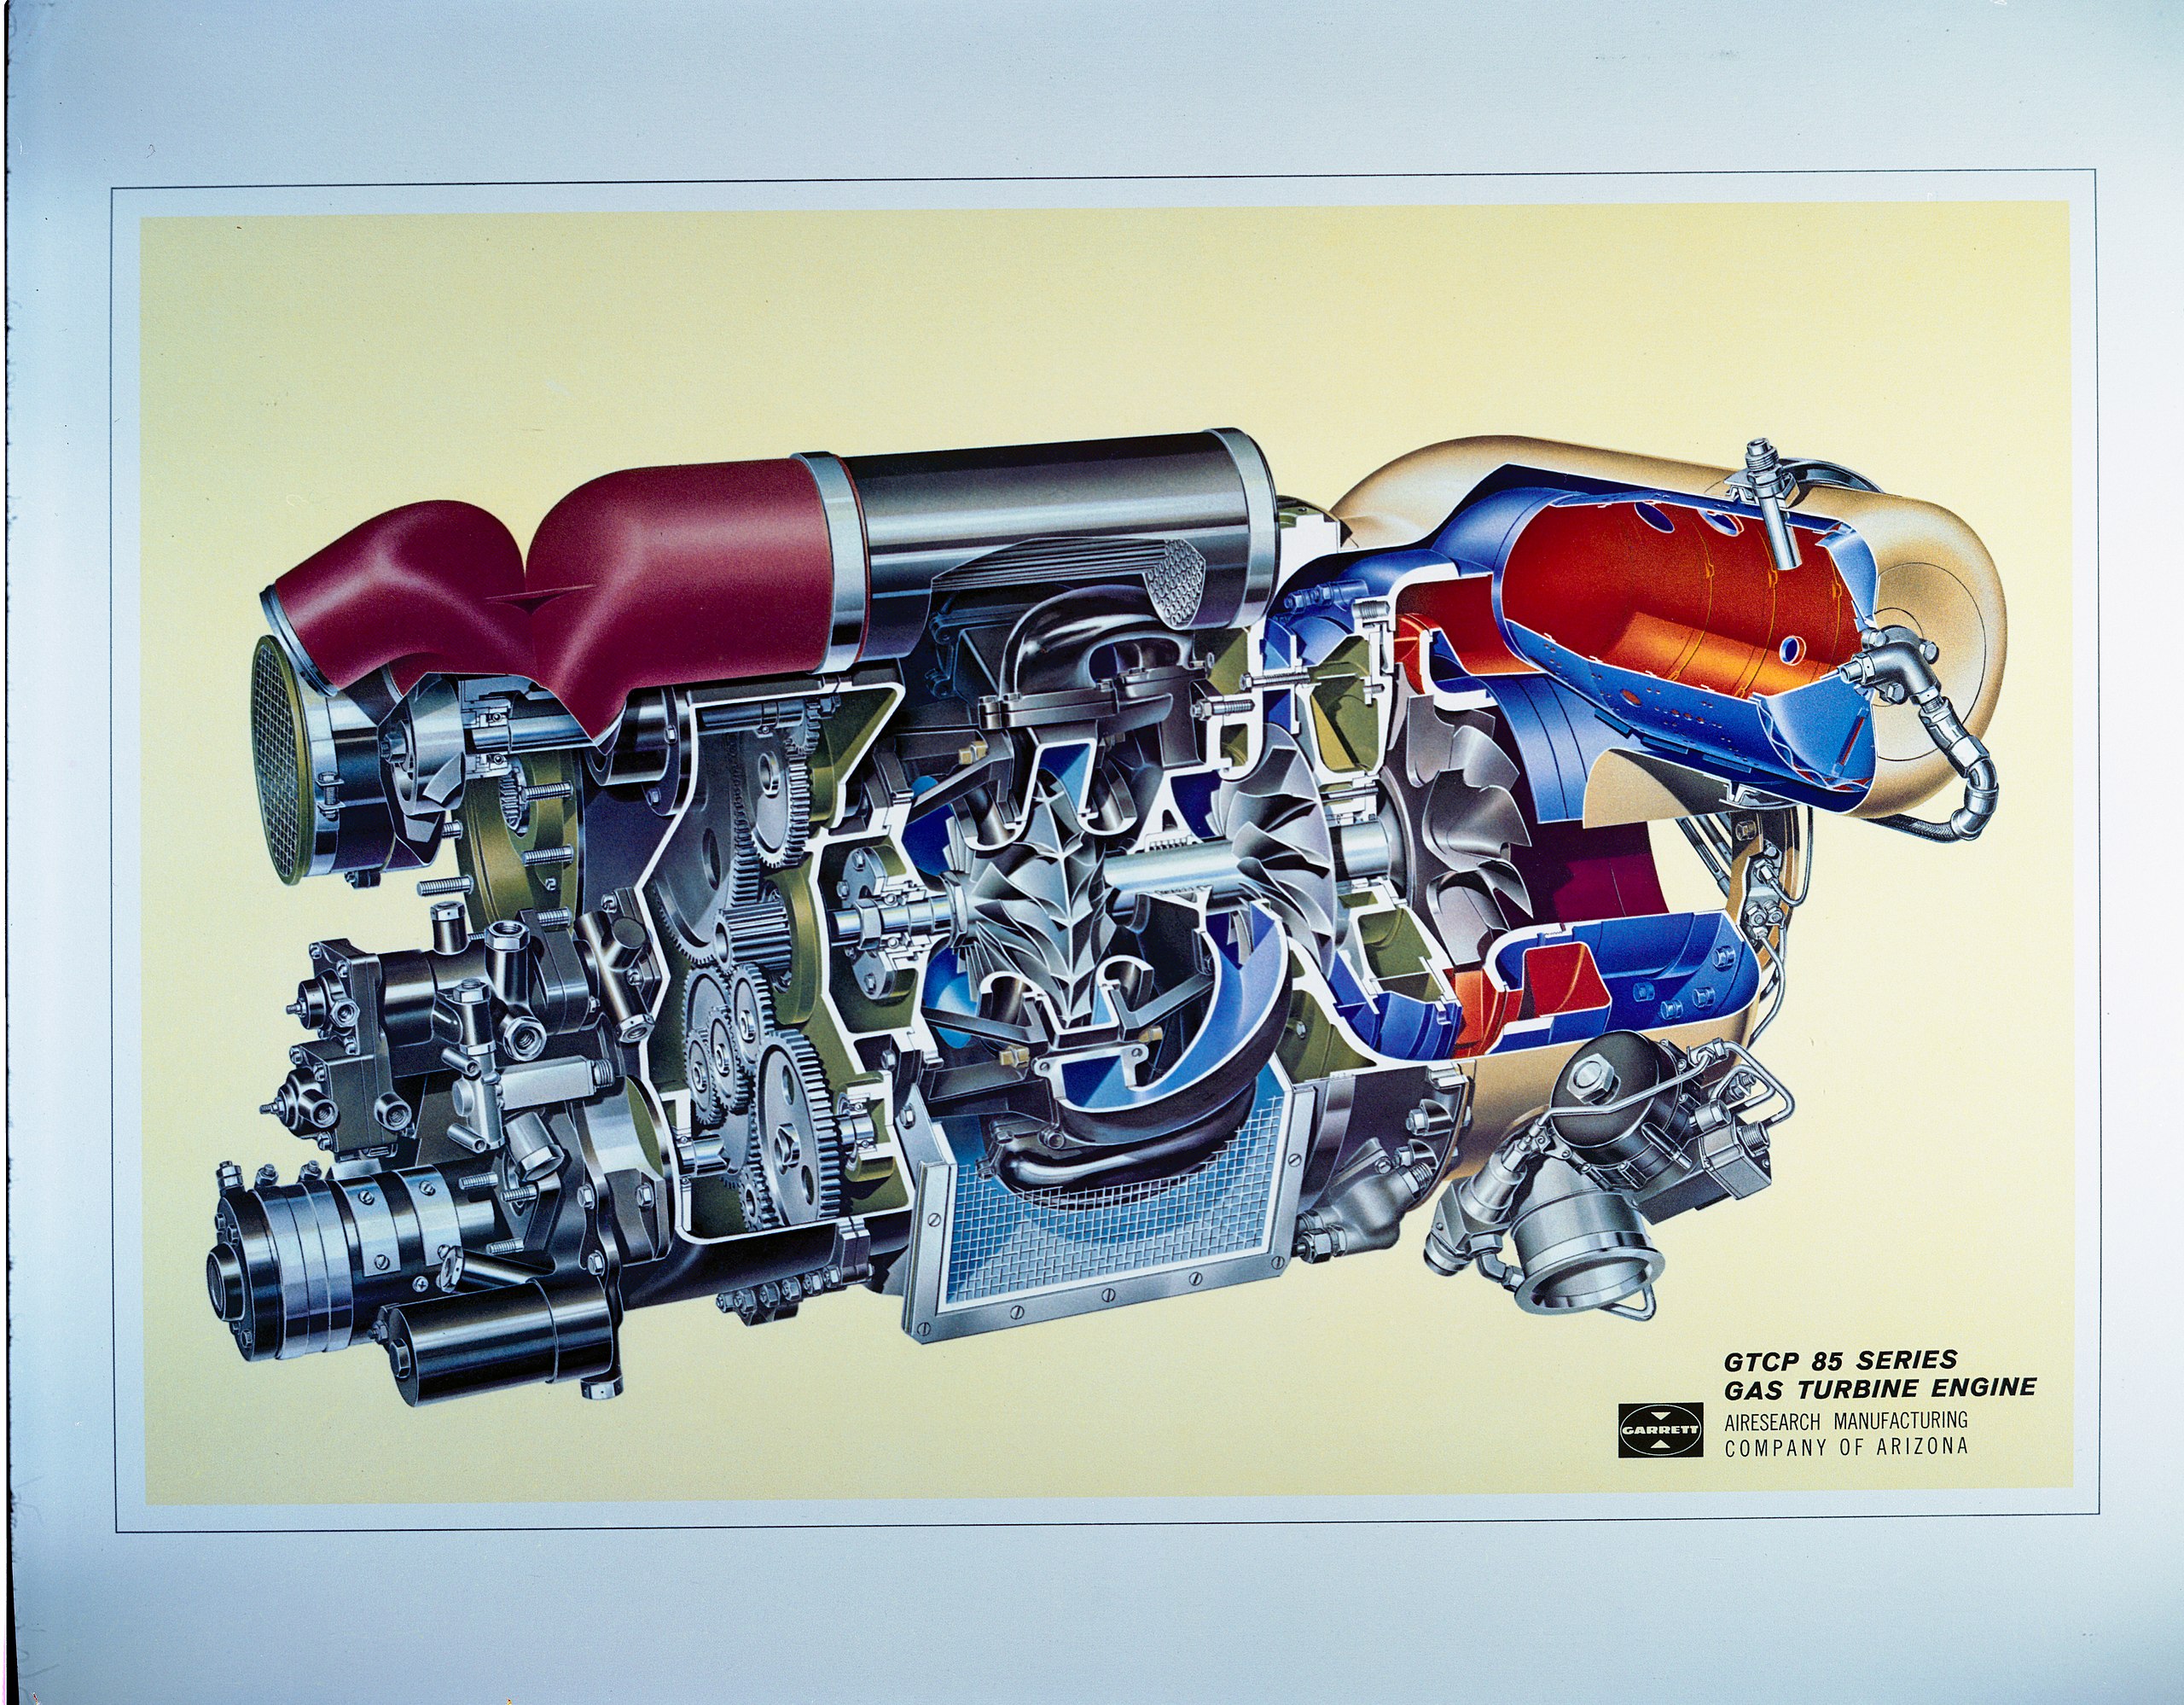 General 2560x1998 jet engine cutaway diagrams vehicle technology digital art simple background text frame